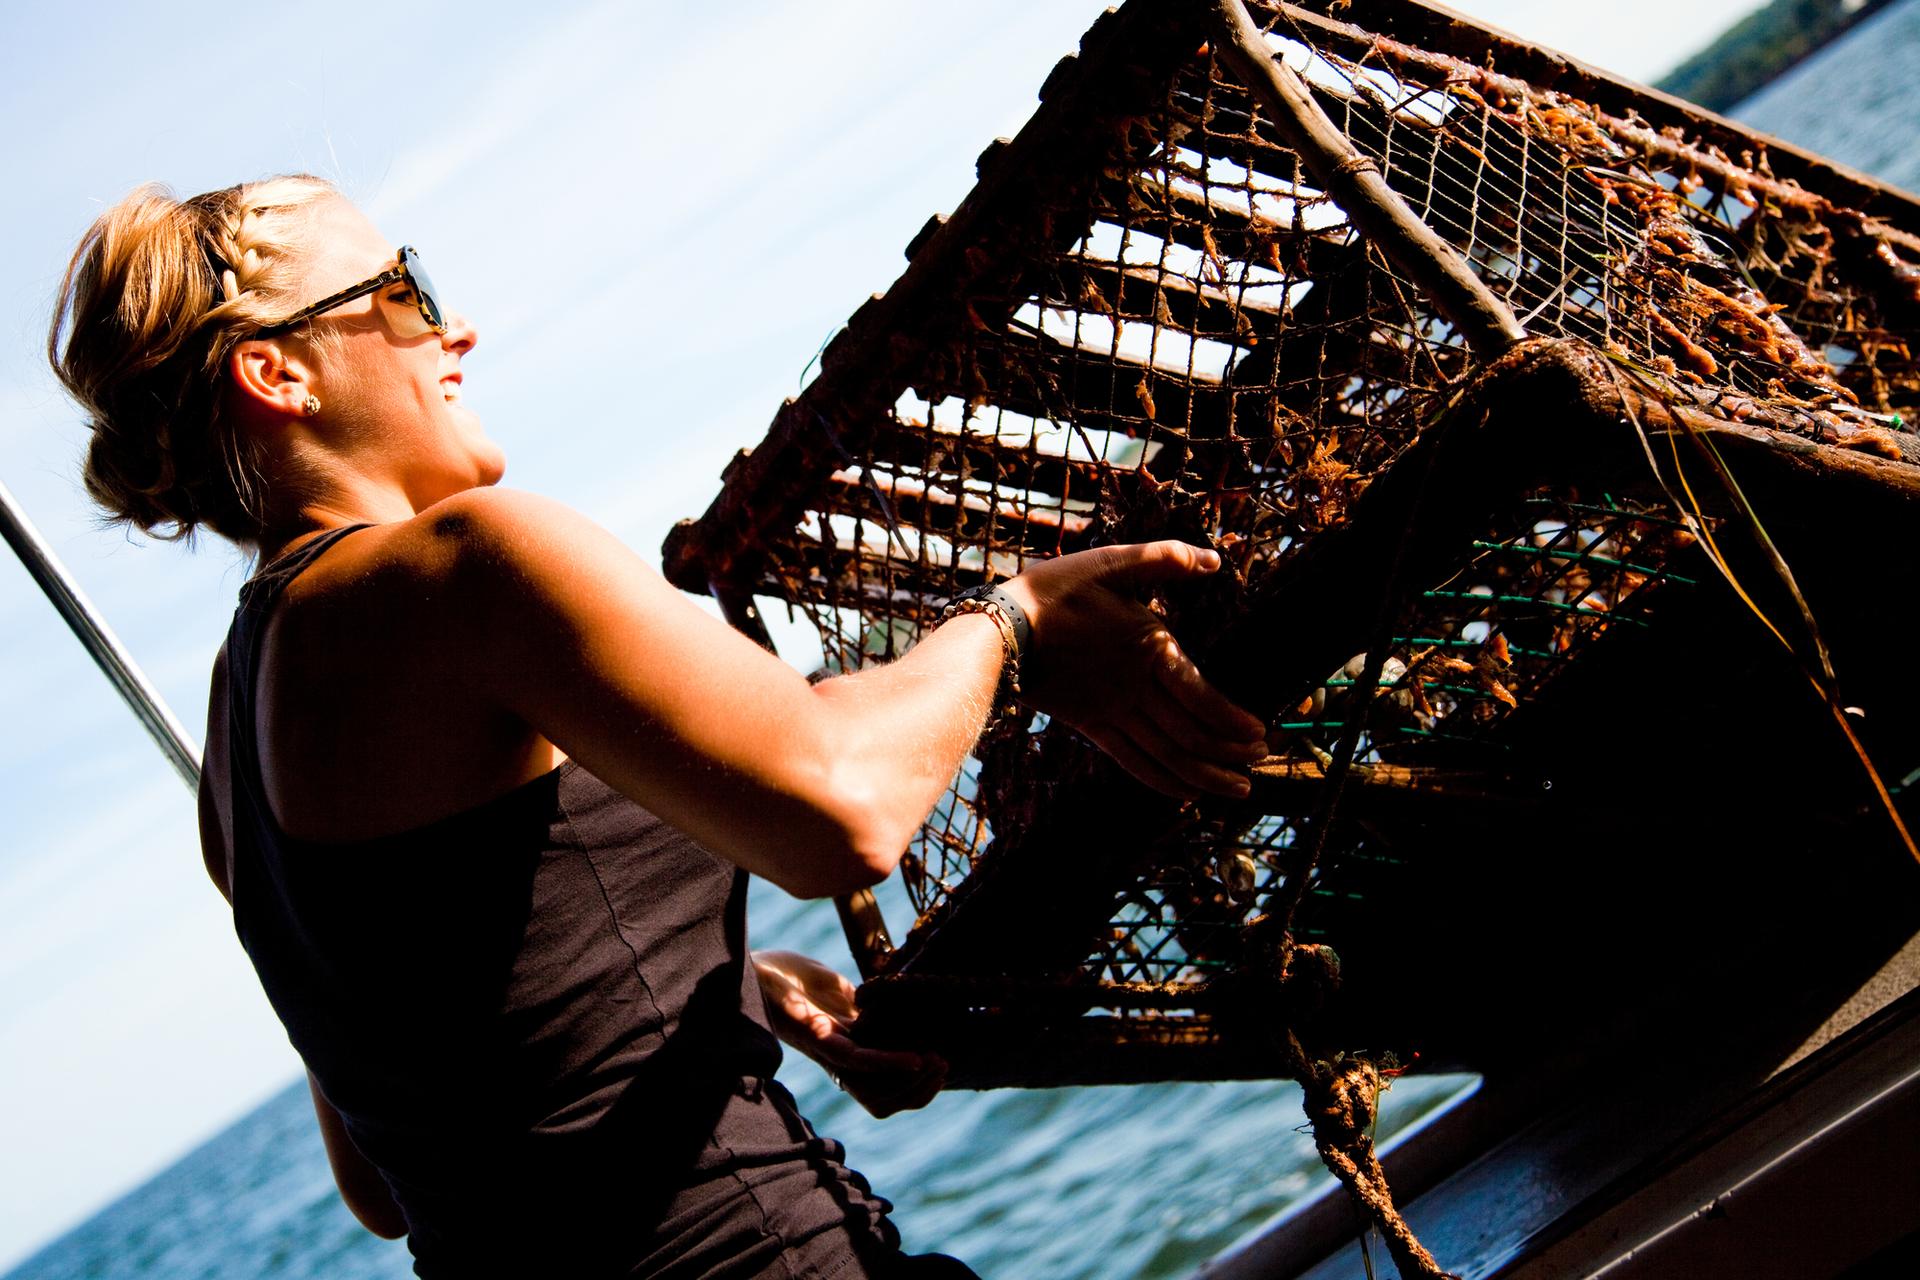 A woman pulls a lobster trap onto a boat